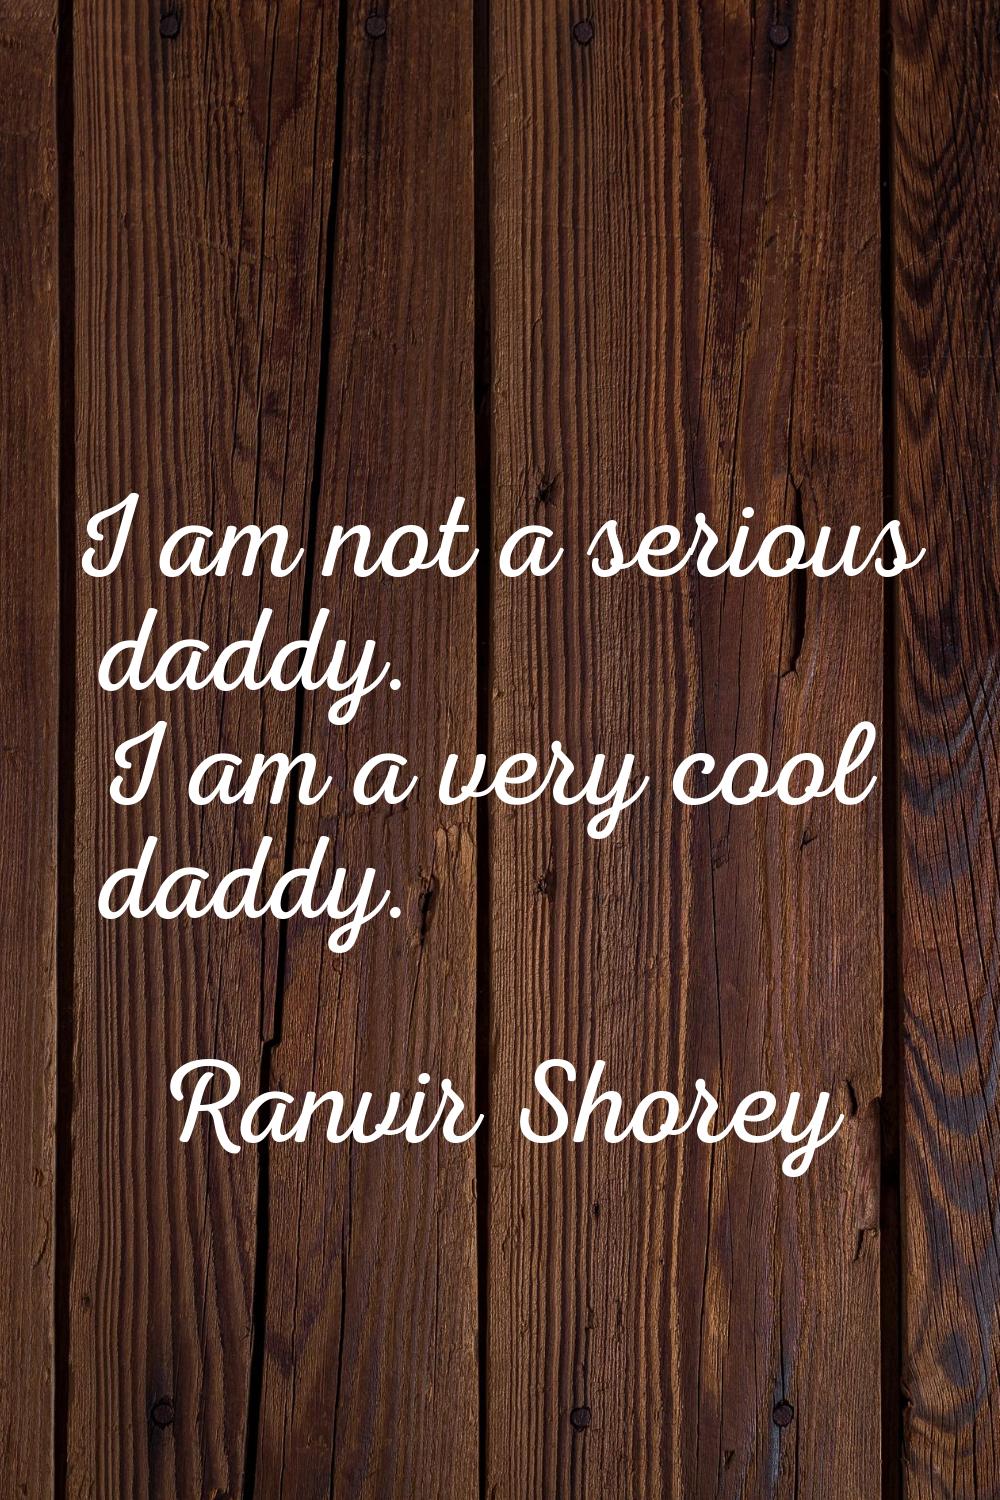 I am not a serious daddy. I am a very cool daddy.